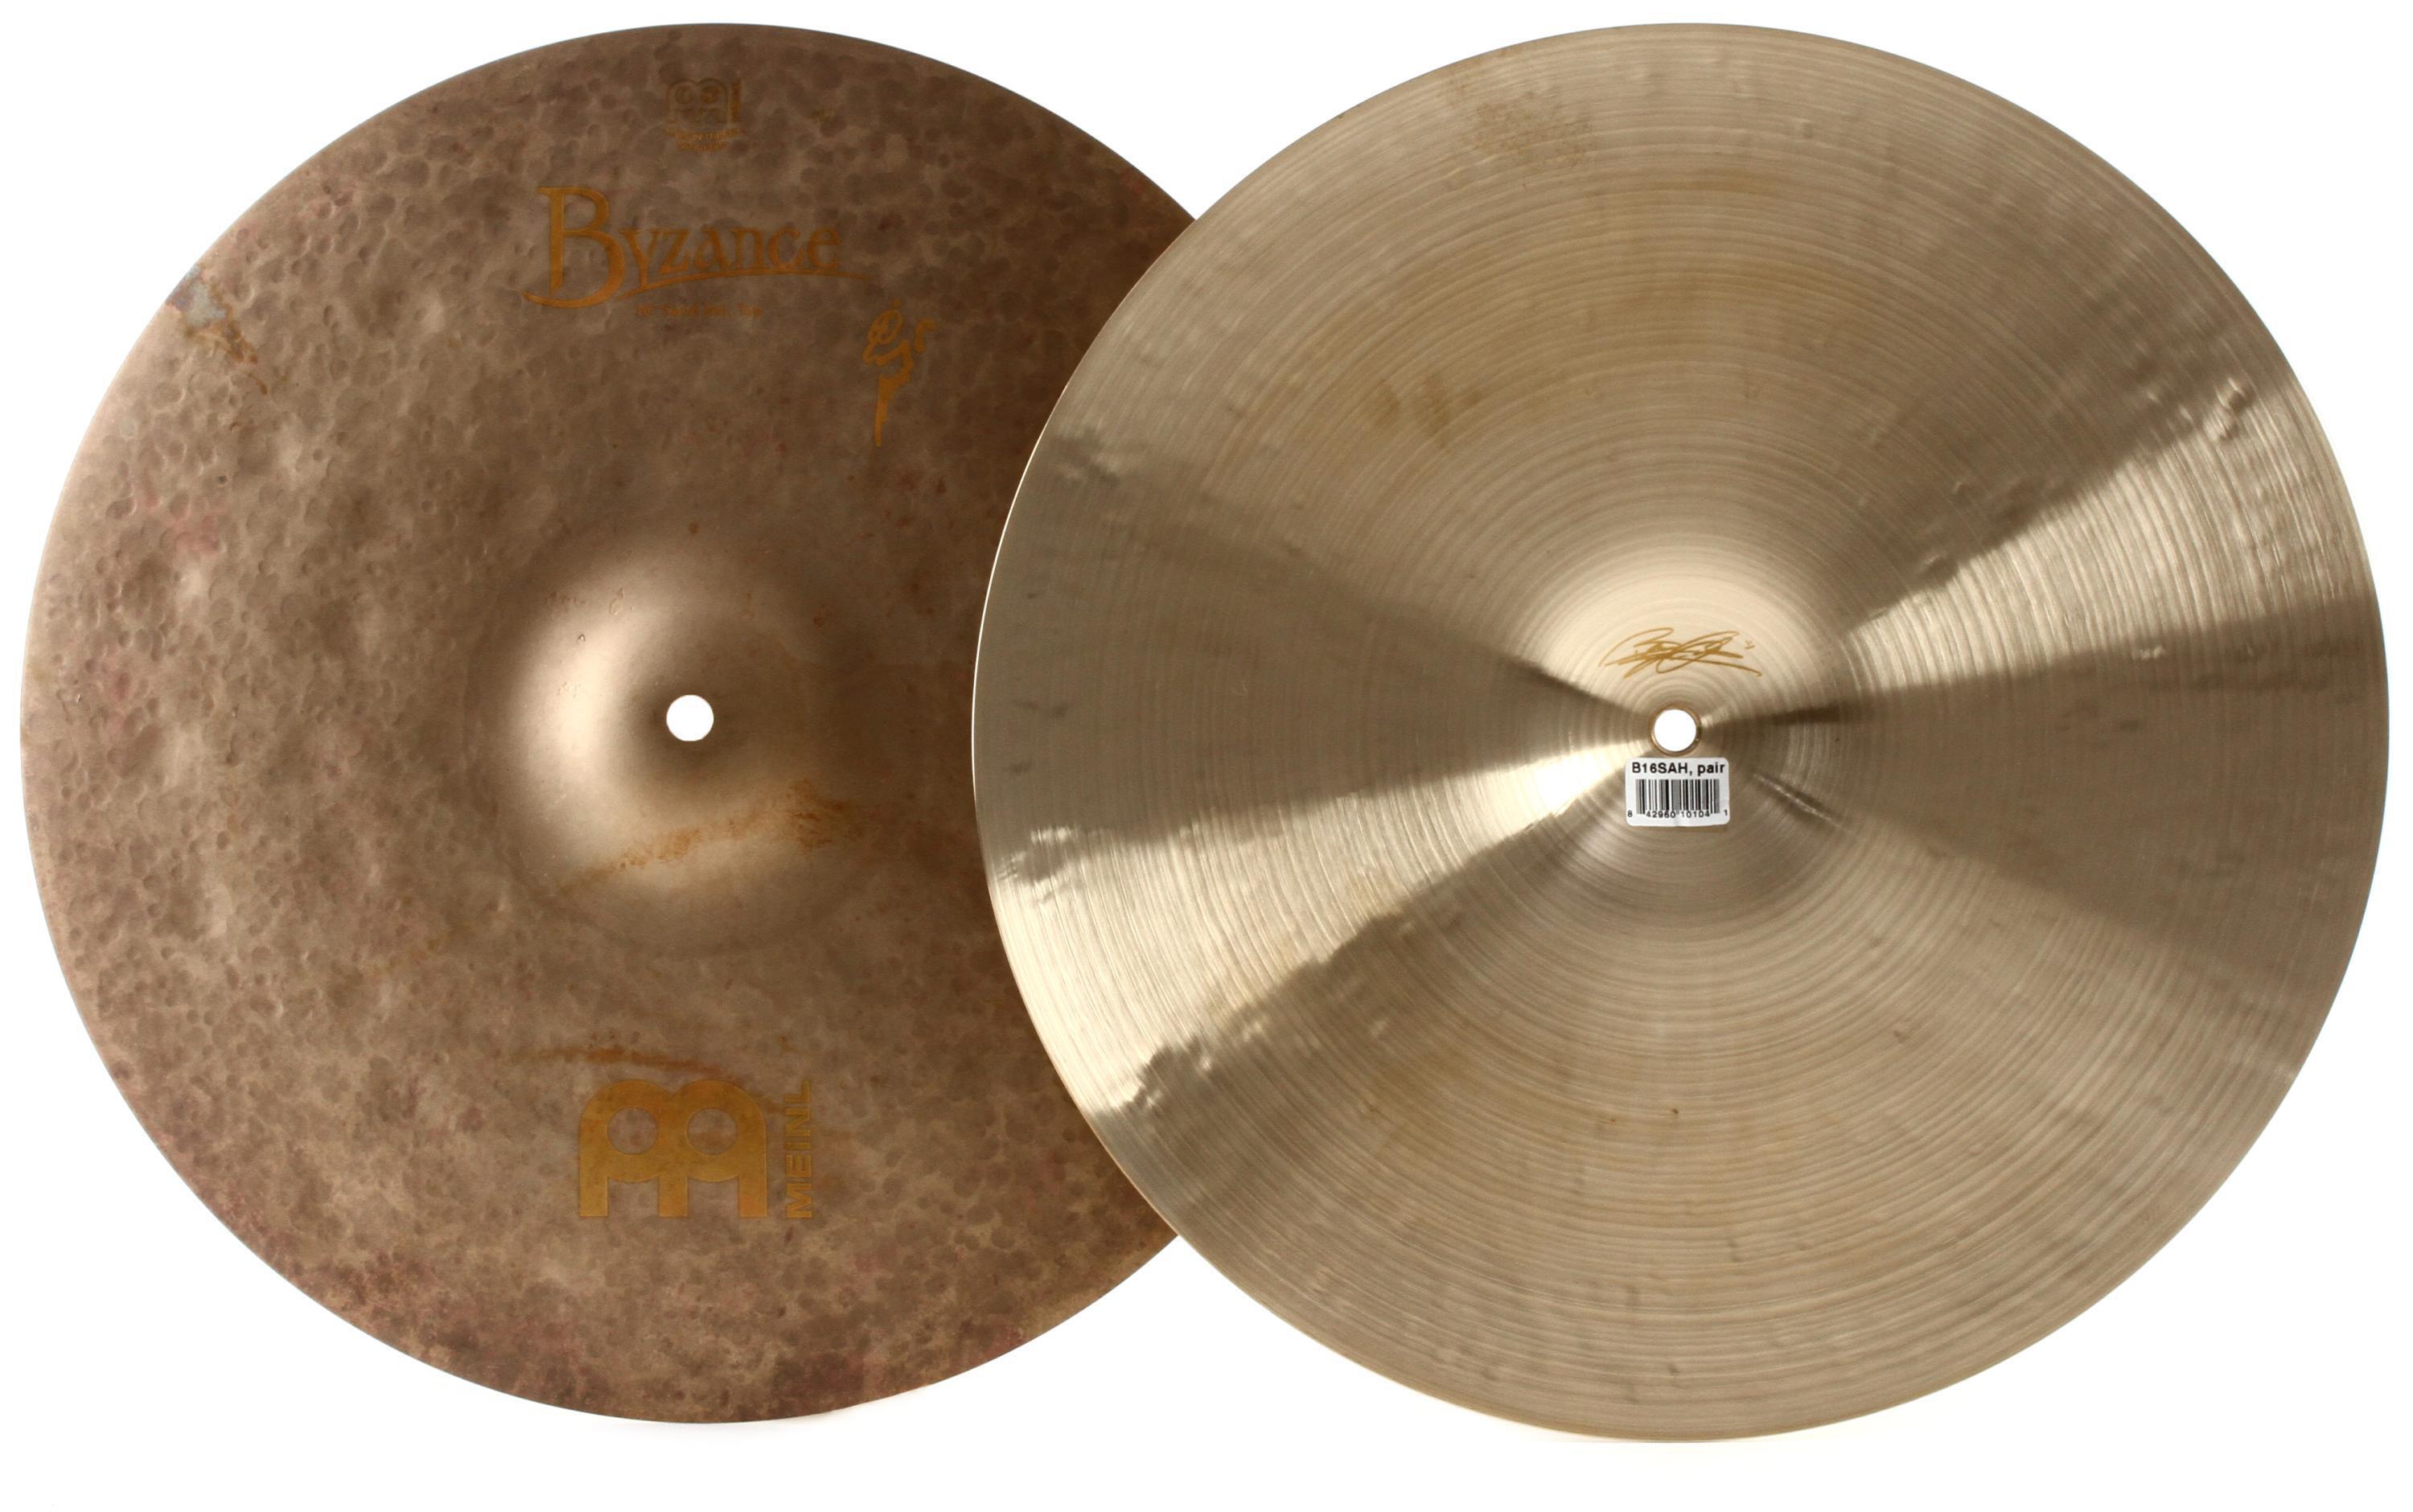 Meinl Cymbals 16 inch Byzance Vintage Sand Hi-hat Cymbals | Sweetwater